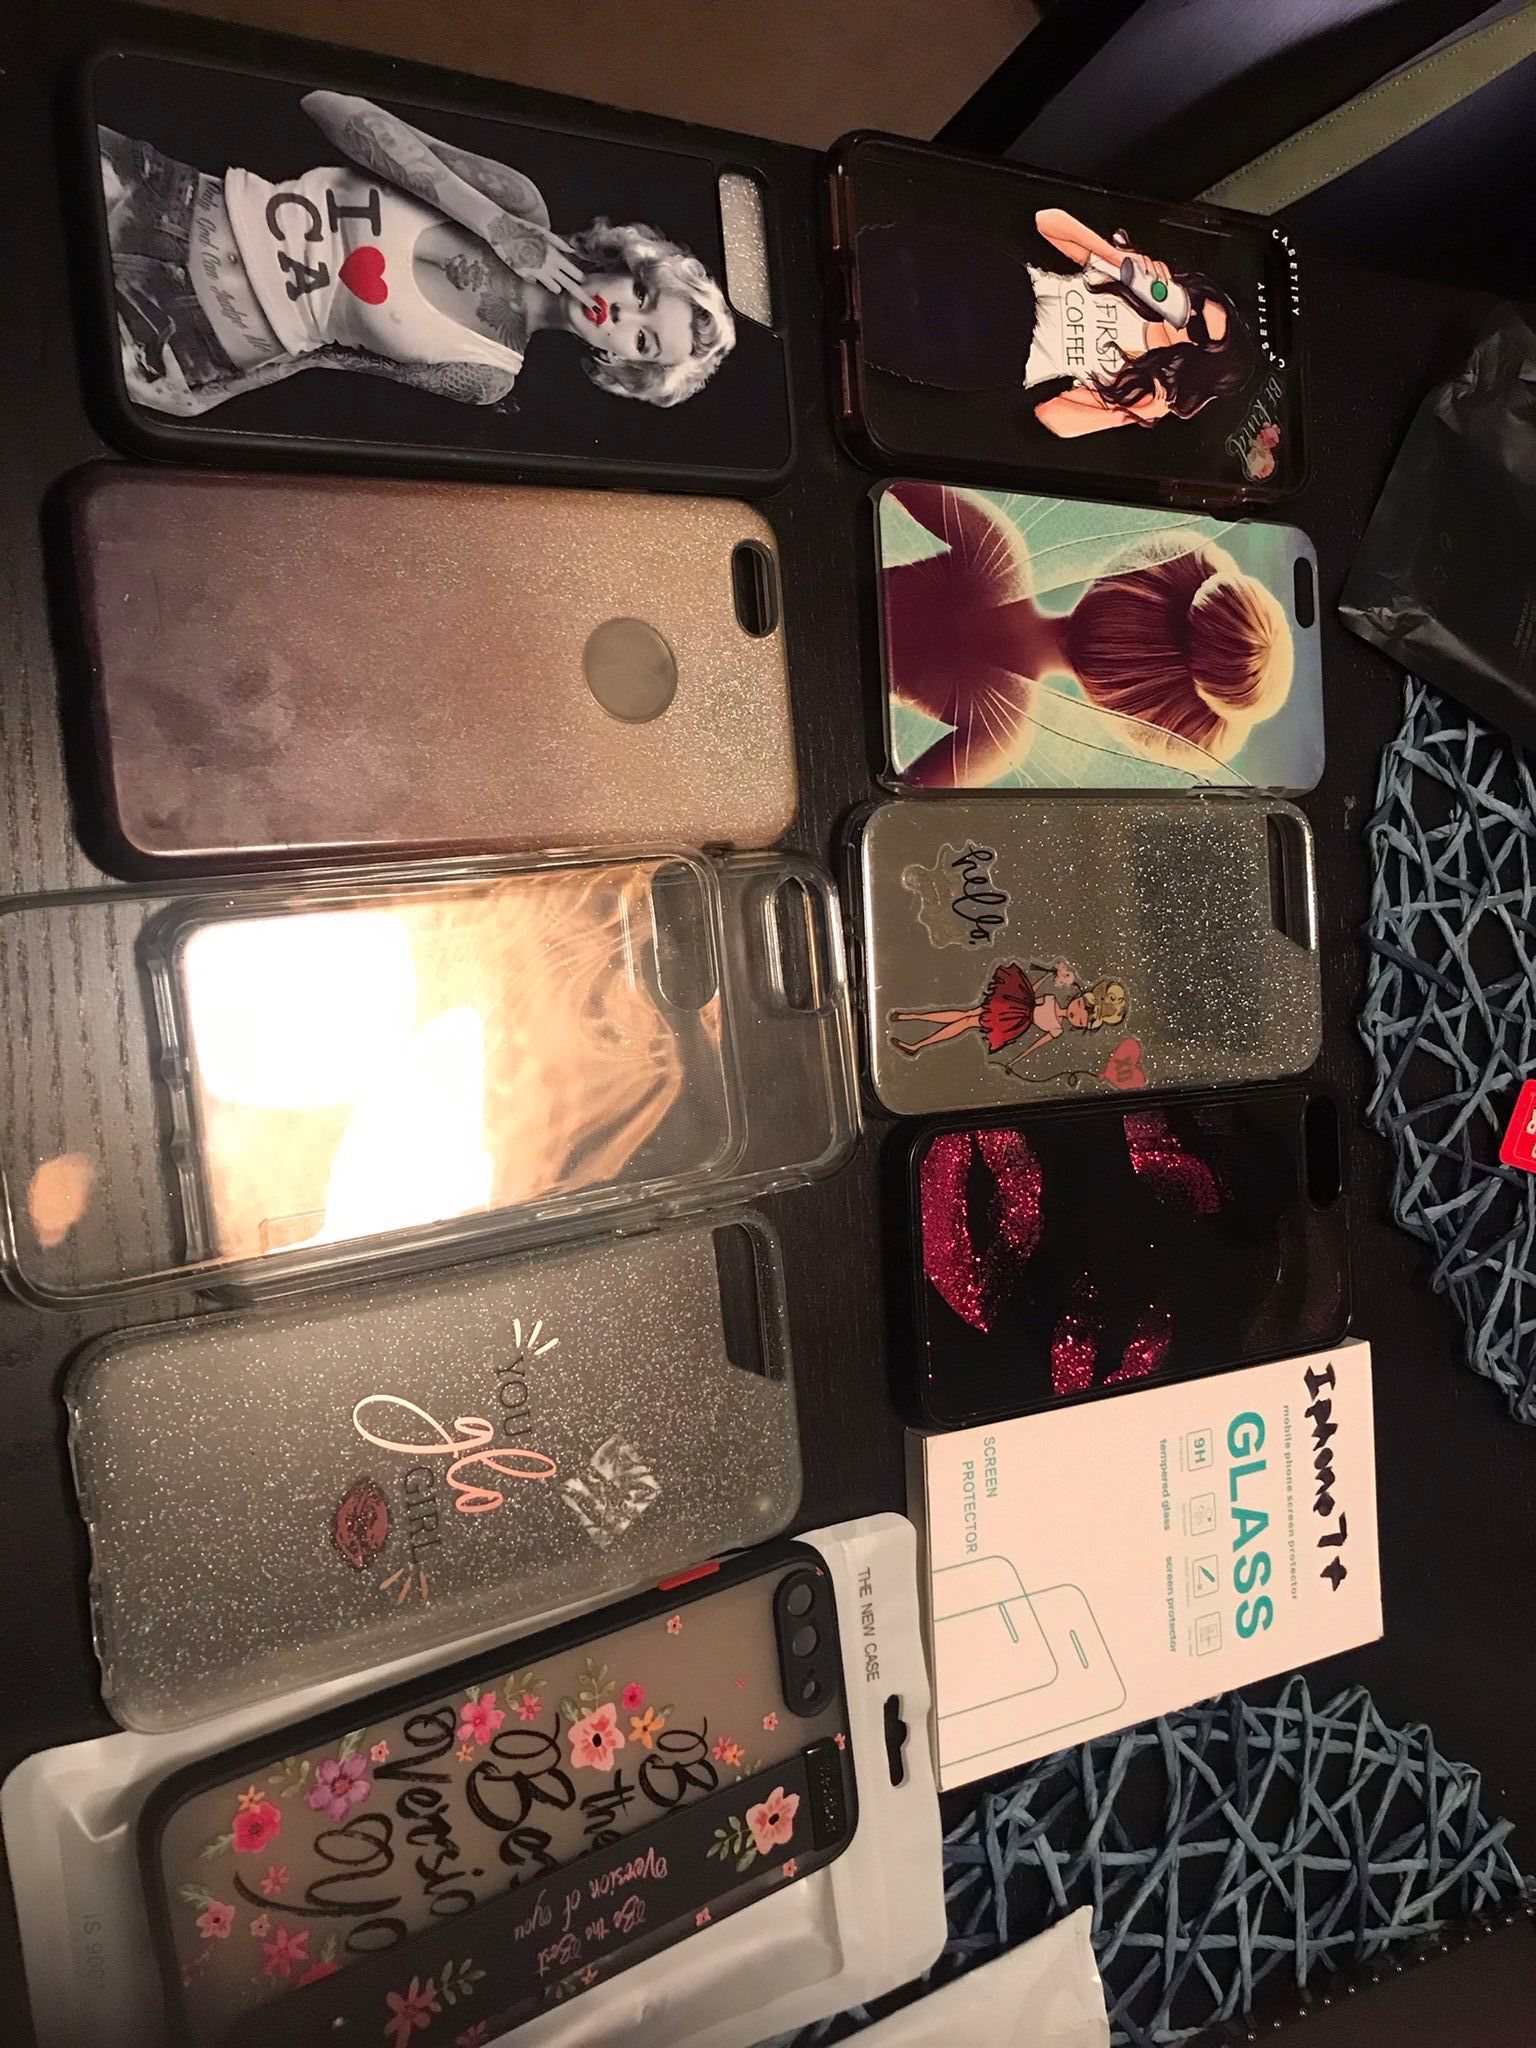 iPhone 7 Plus Cases And One Kate Spade Case For iPhone X